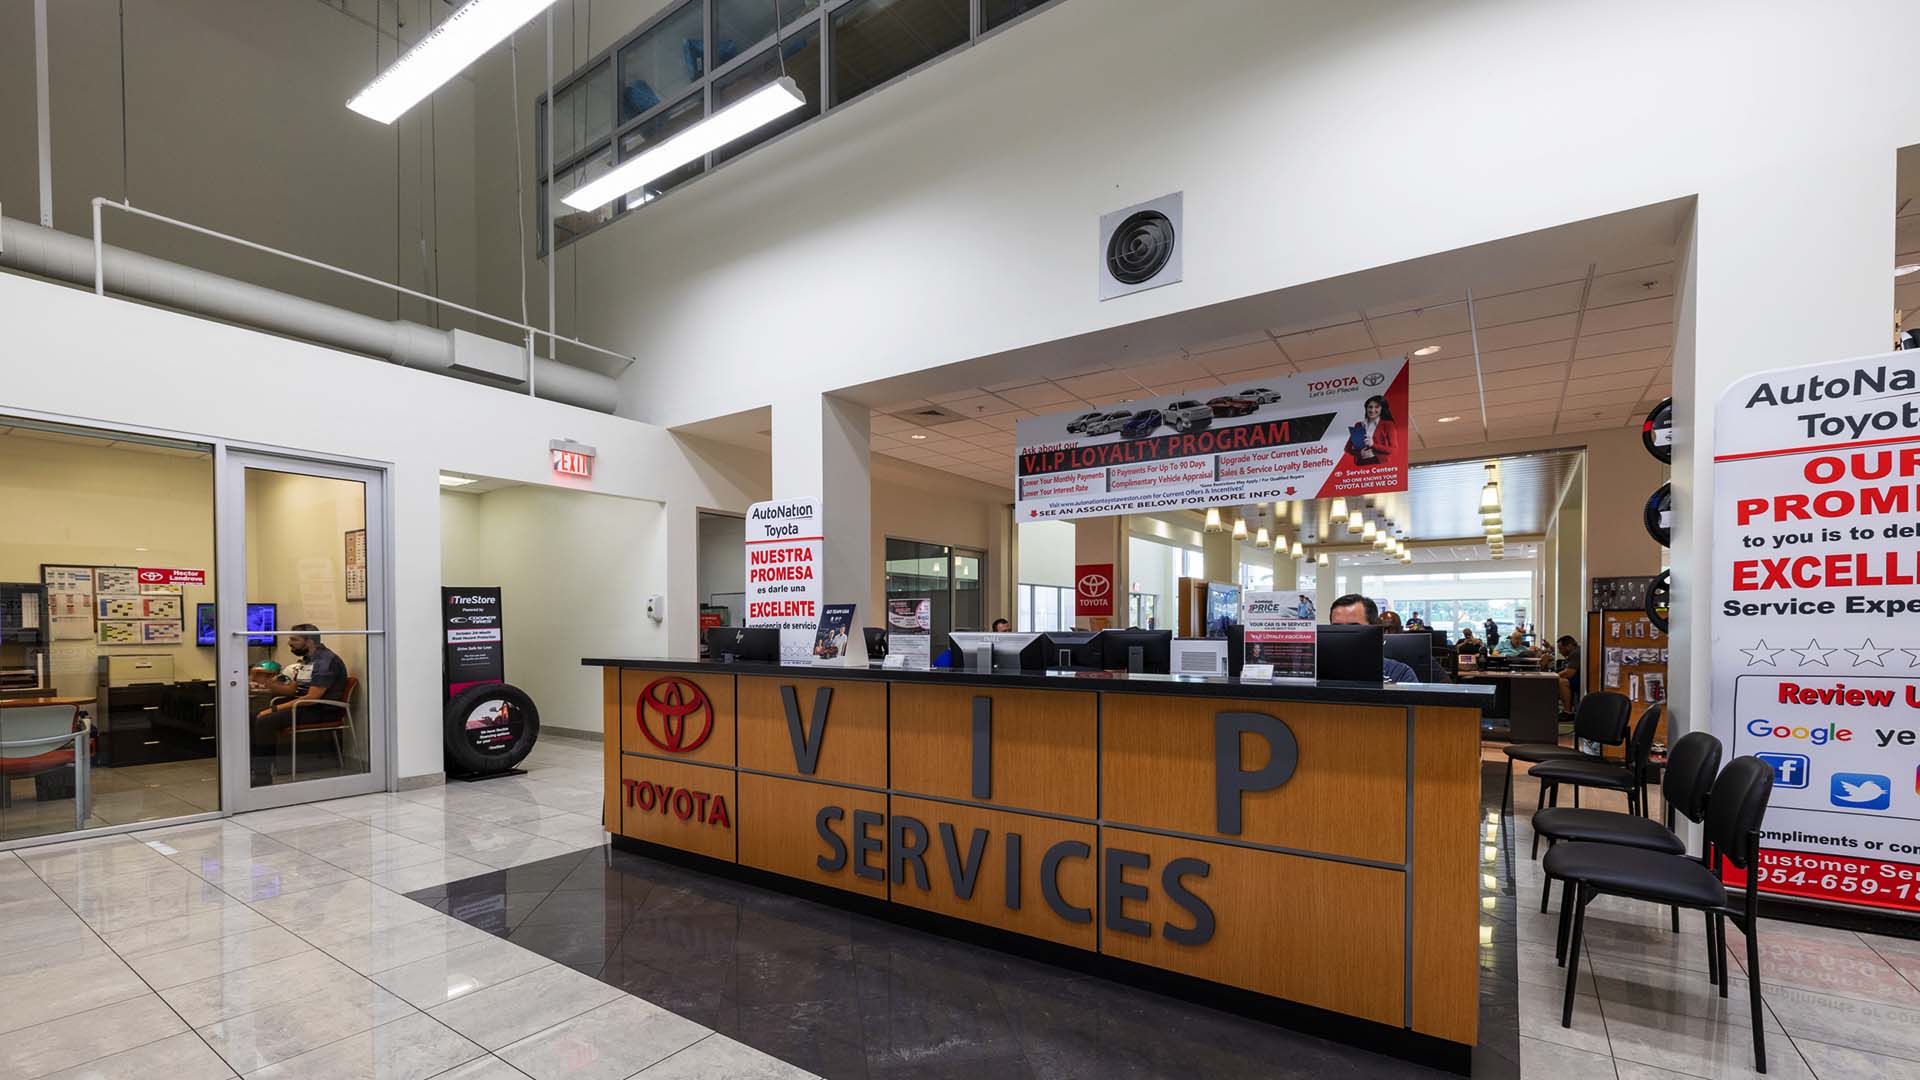 View of the Toyota finance counter at AutoNation Toyota Weston